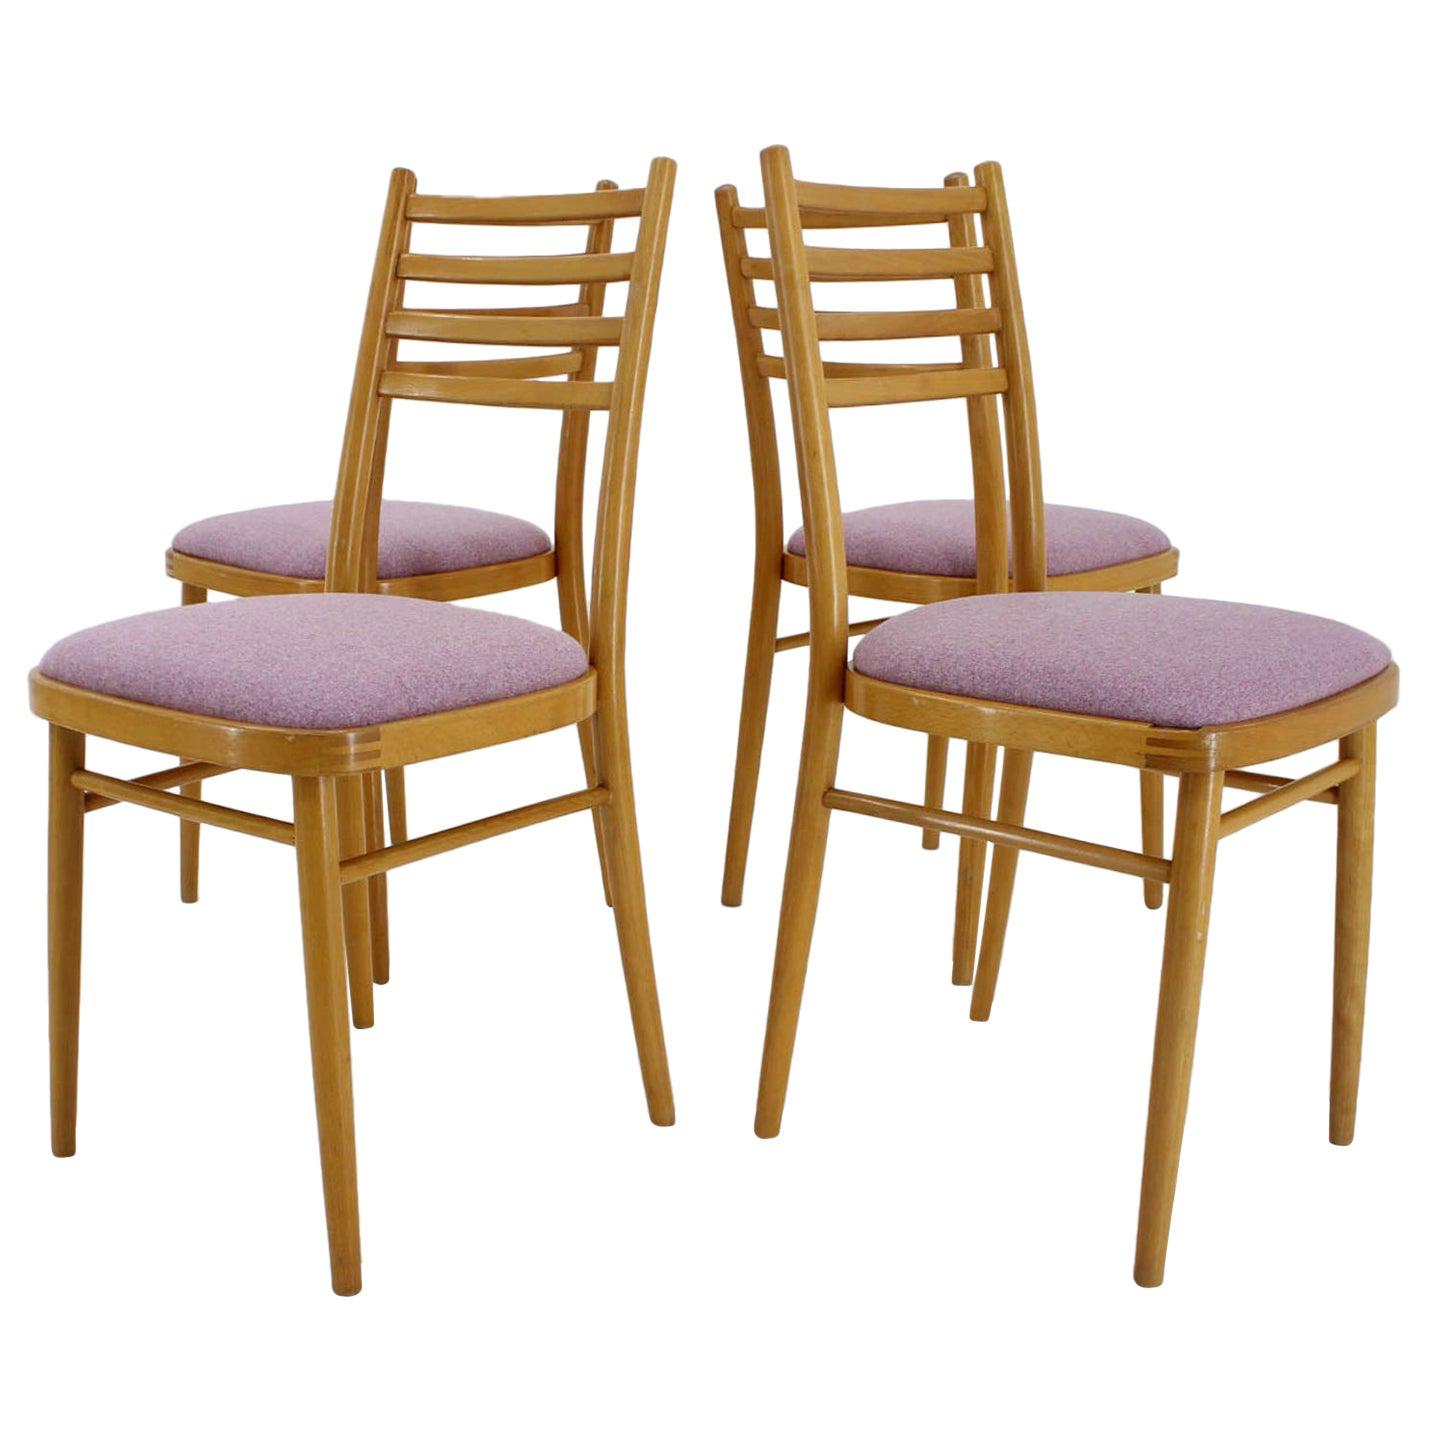 Set of Four Midcentury Dining Chairs by Interier Praha, 1970, Czechoslovakia For Sale